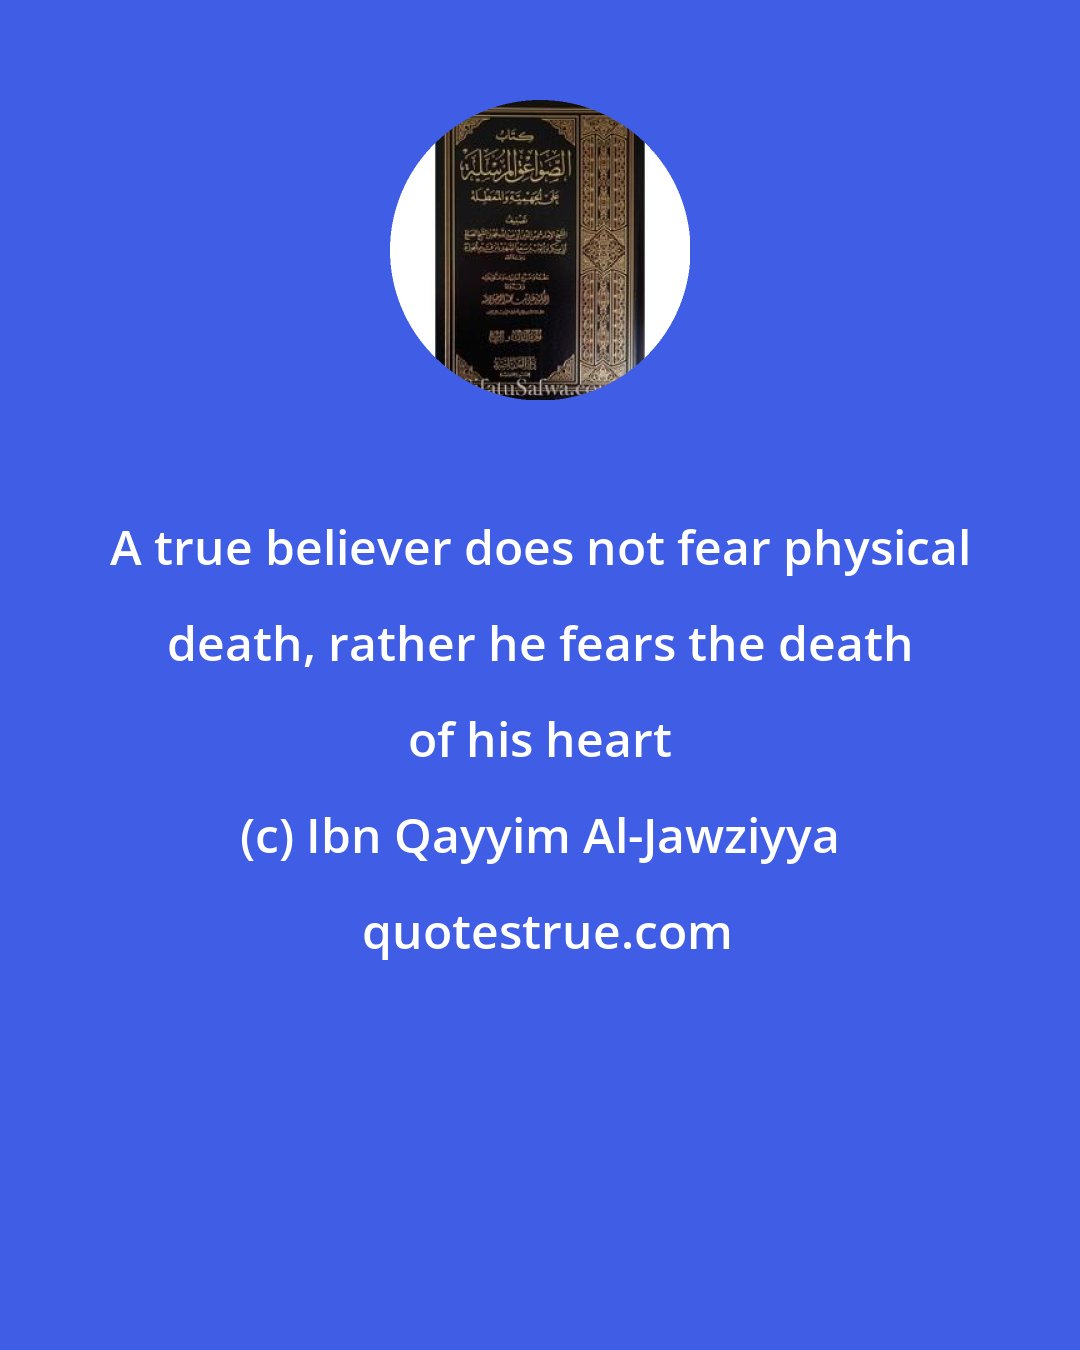 Ibn Qayyim Al-Jawziyya: A true believer does not fear physical death, rather he fears the death of his heart